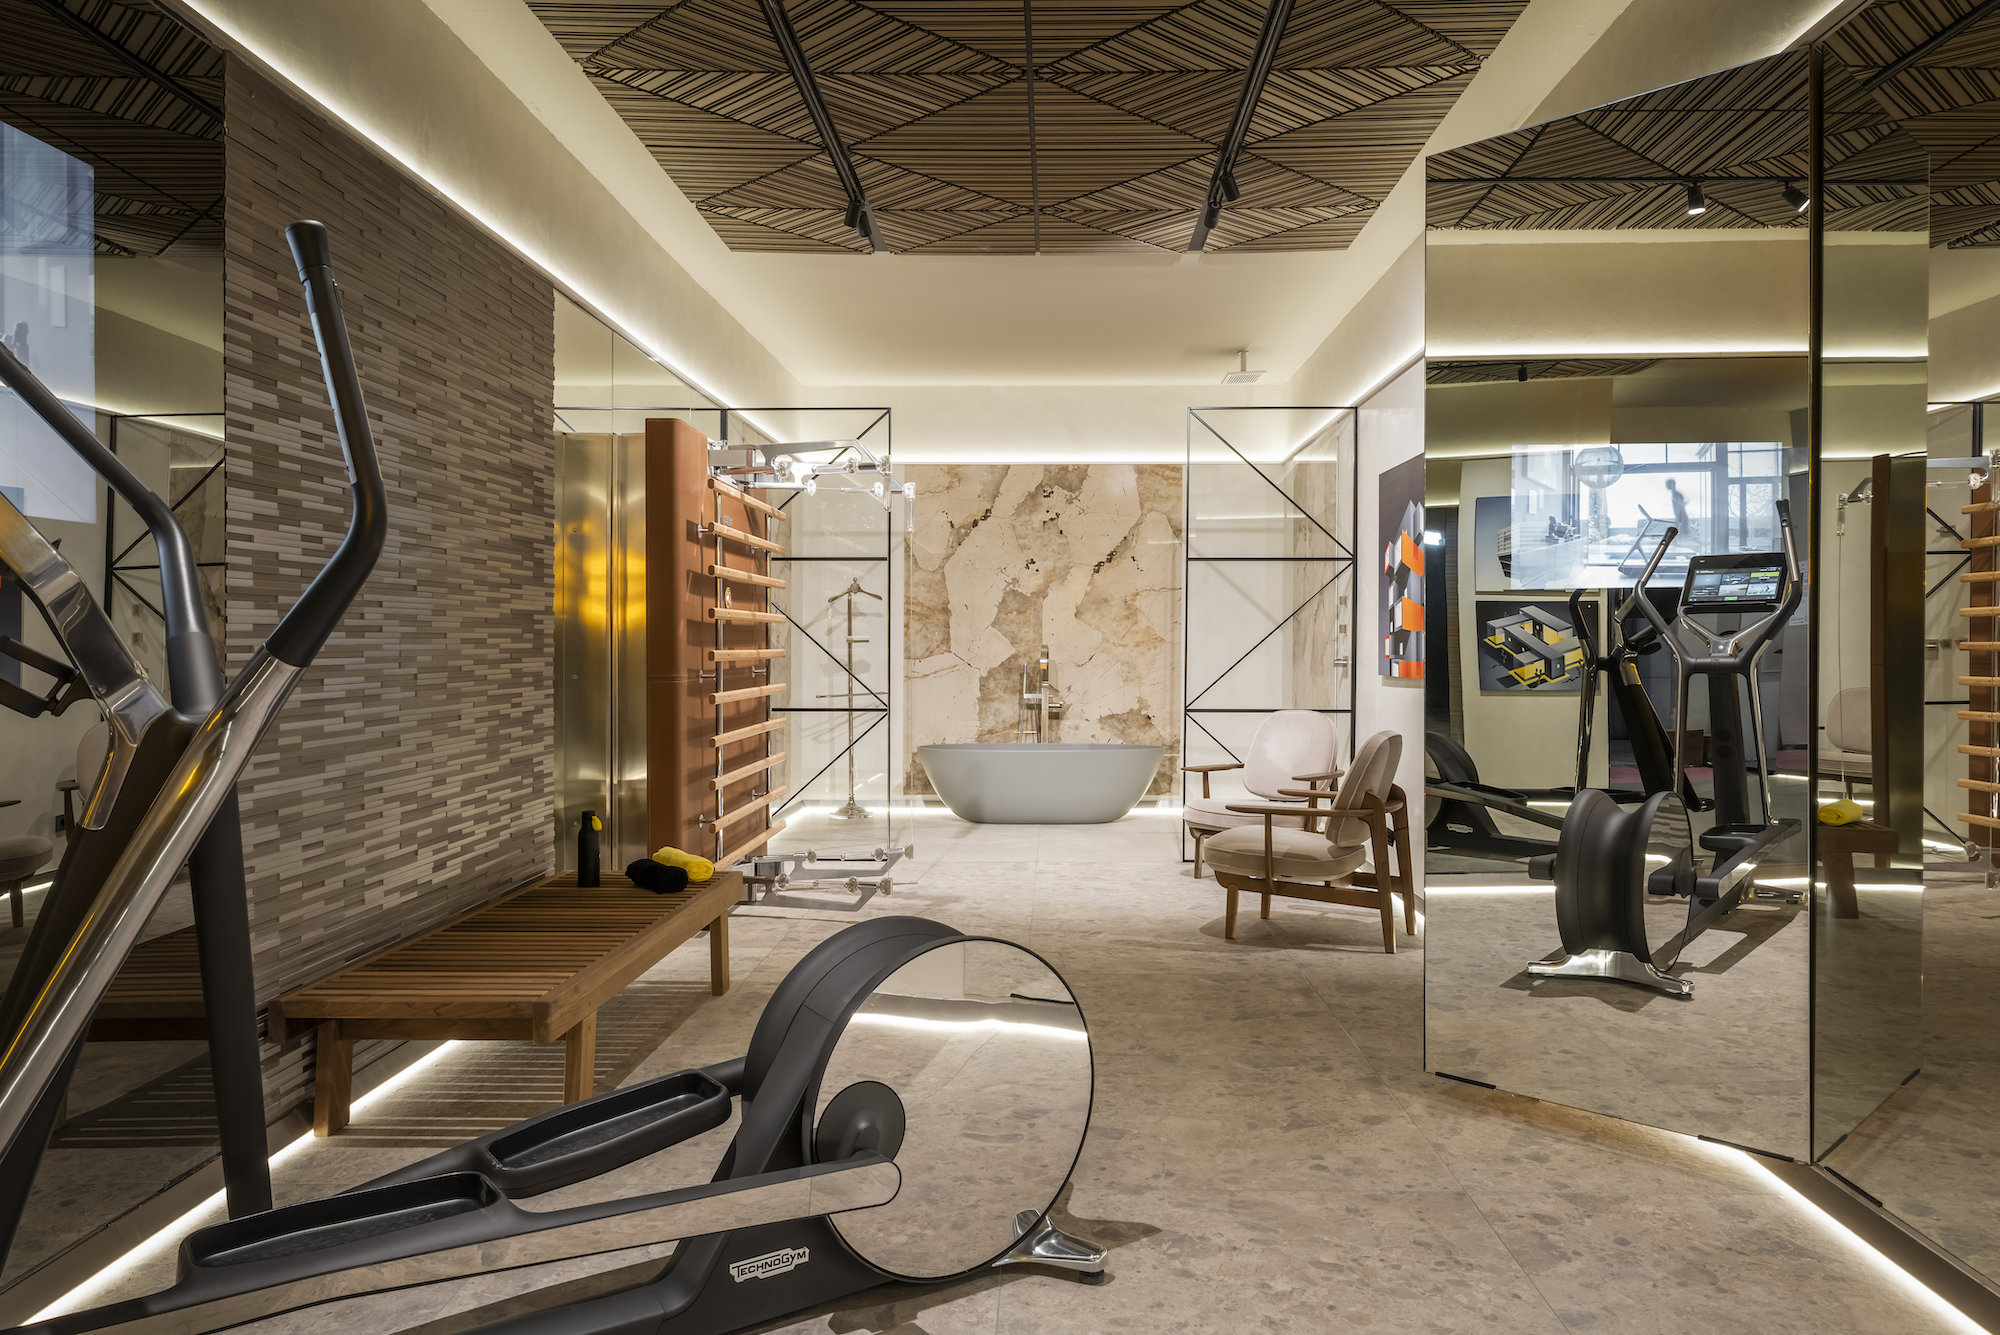 TECHNOGYM BY FREEHAND ARQUITECTURA